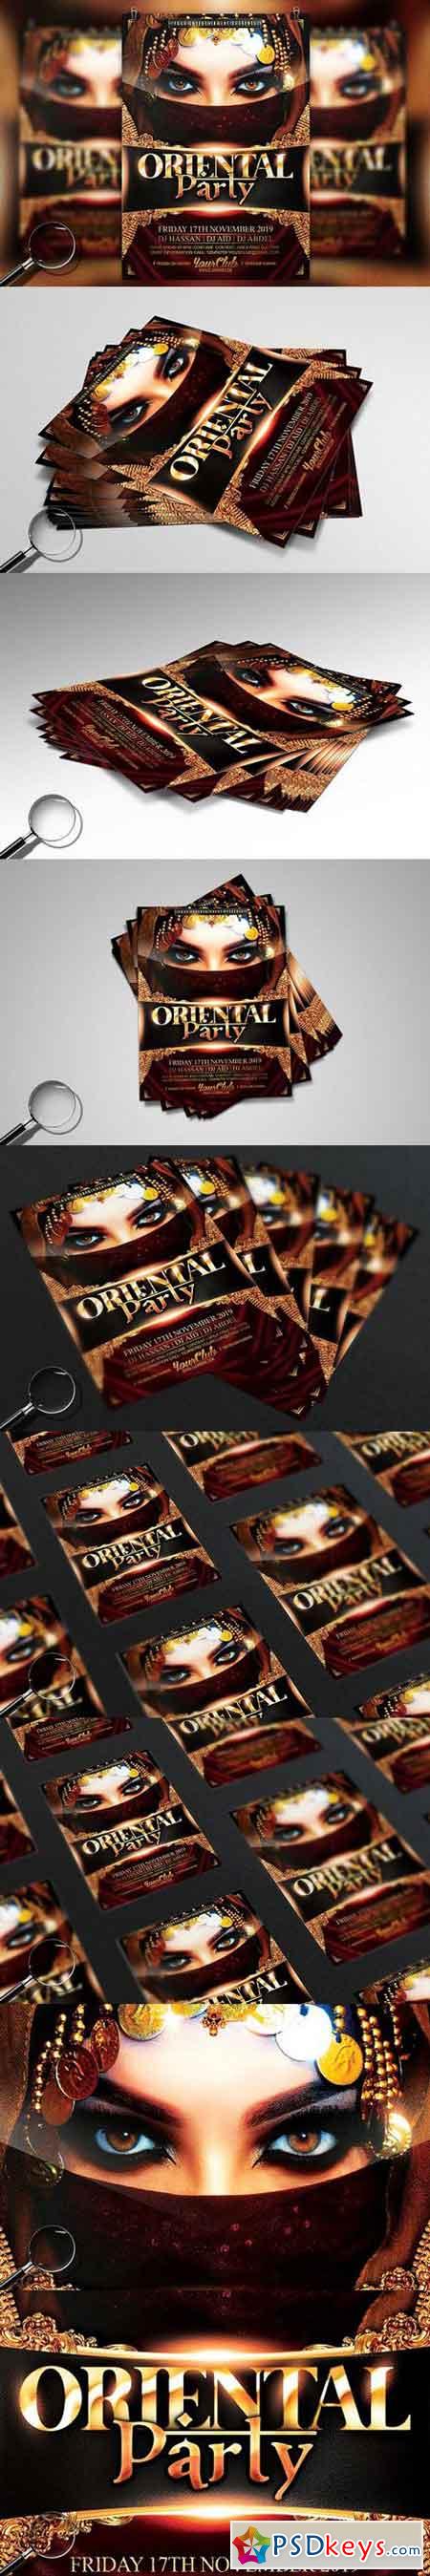 Oriental Party Gold Flyer Template 1635976